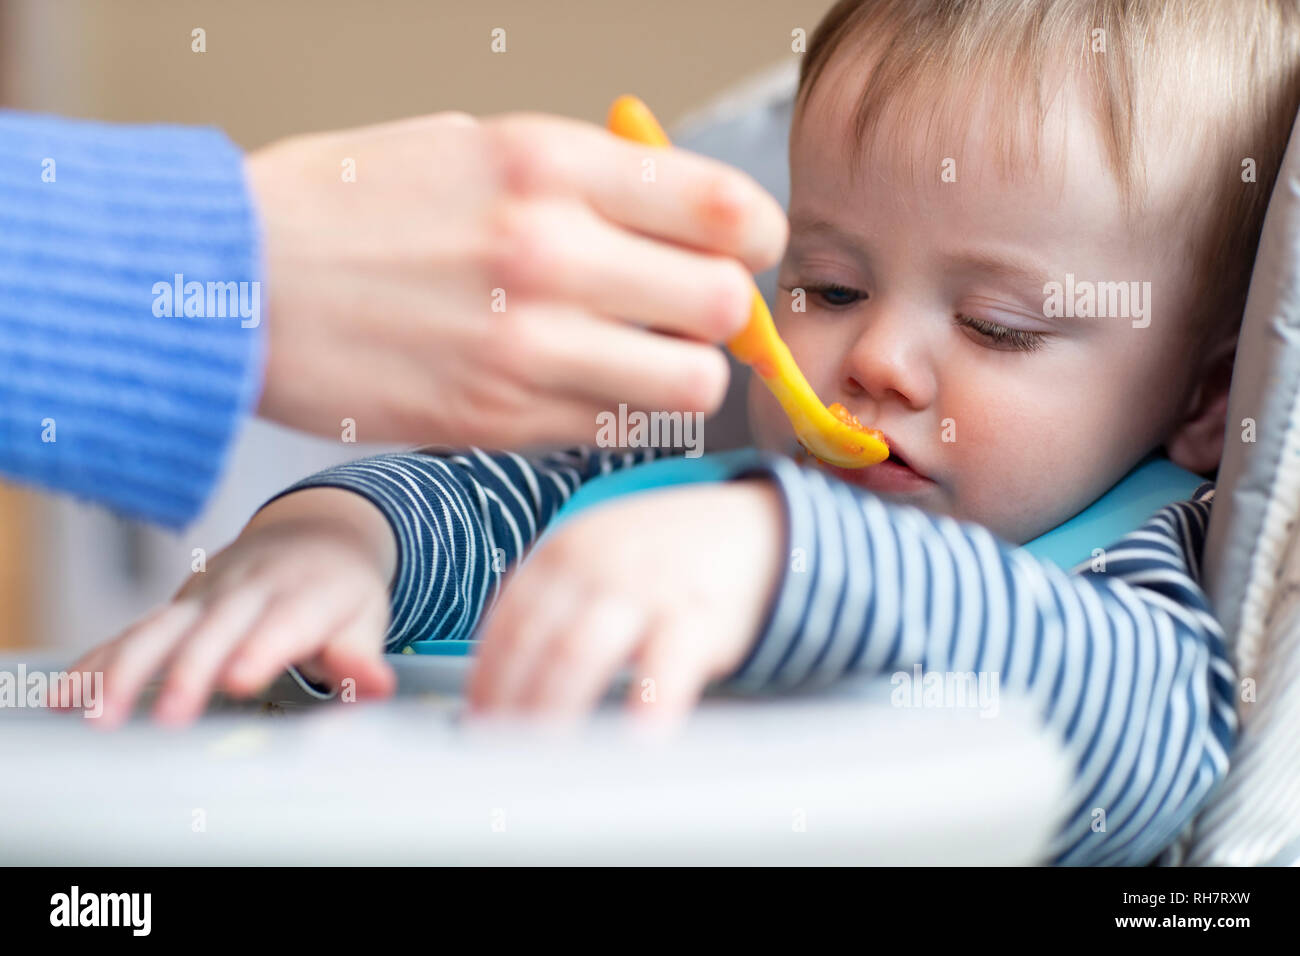 Fussy Baby Boy In High Chair Refusing Food At Meal Time Stock Photo